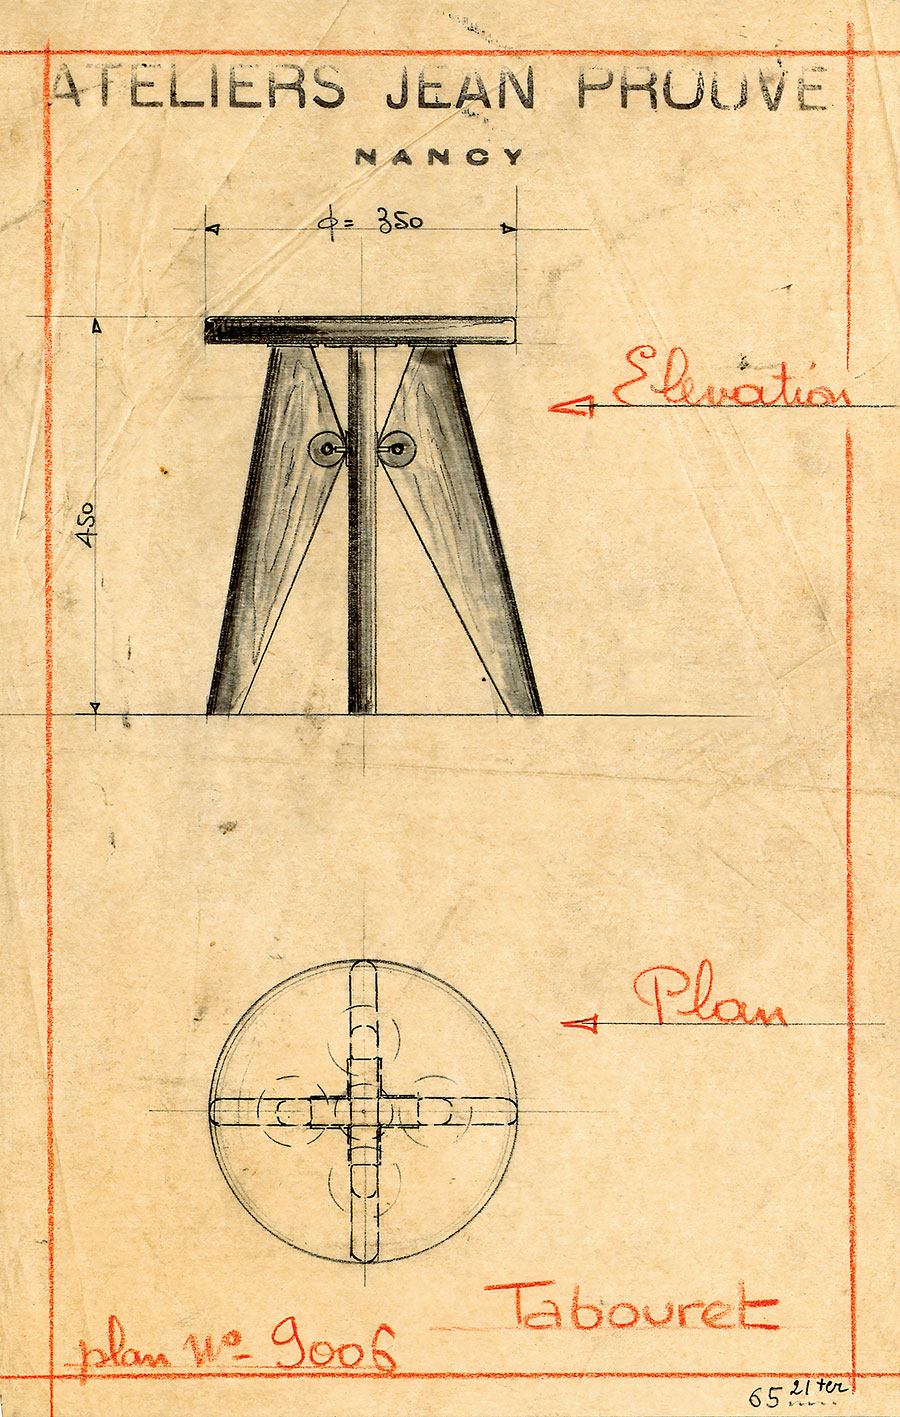 “Stool”. Ateliers Jean Prouvé drawing no. 9006, 1942.